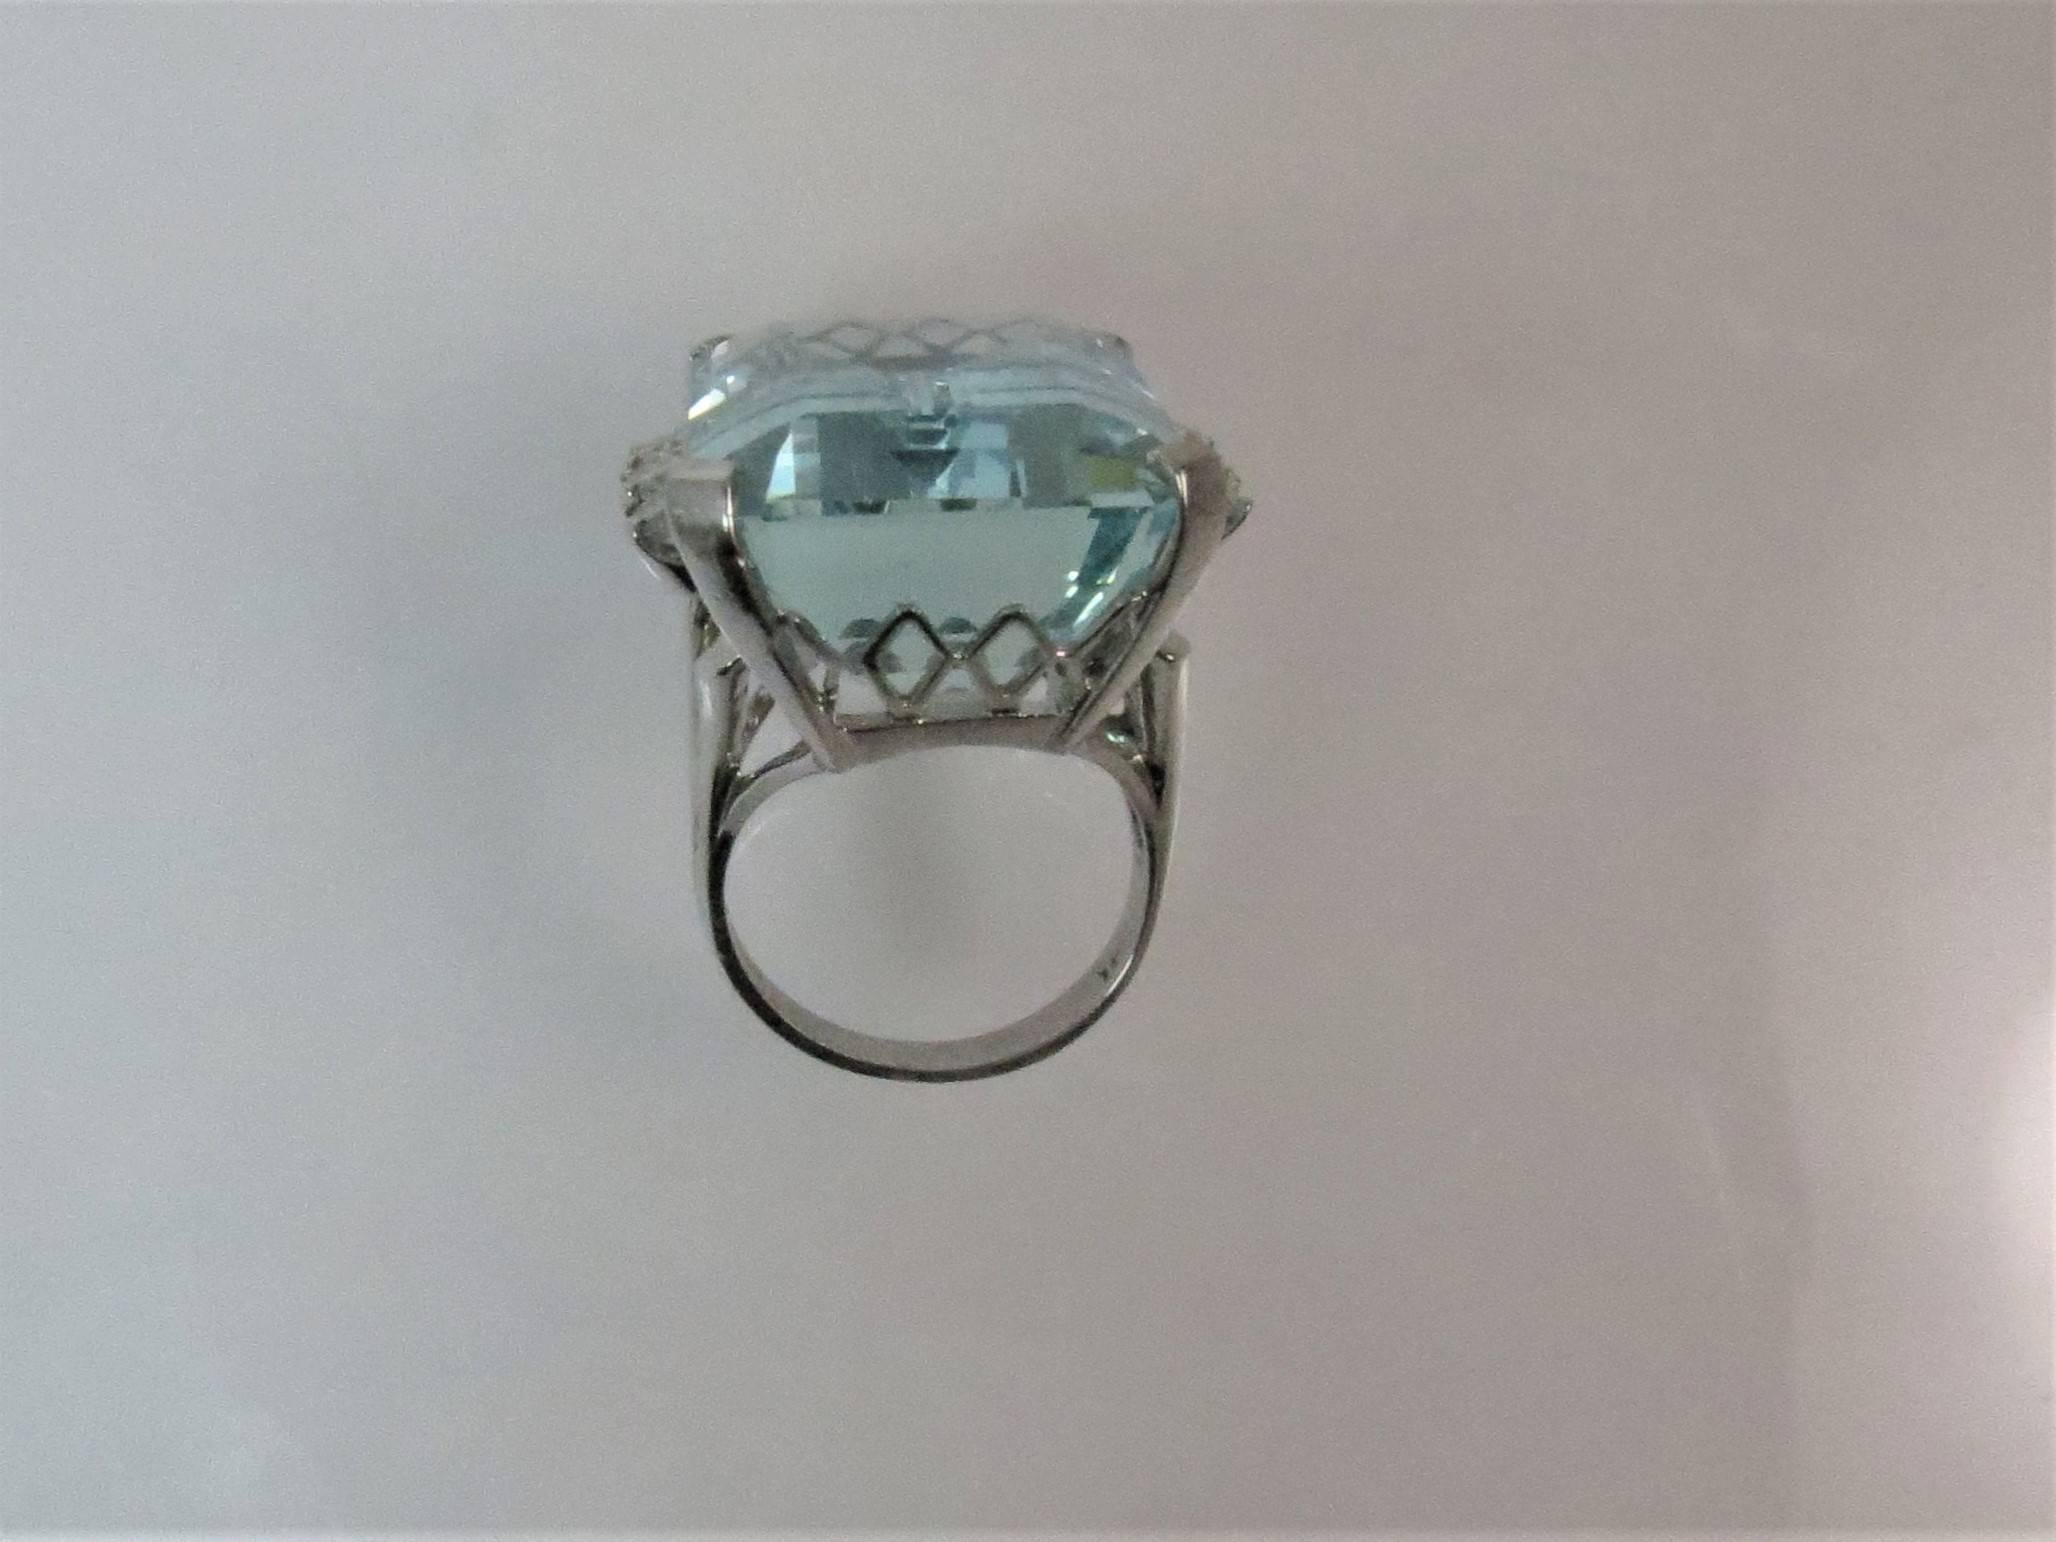  Gorgeous 14K white gold ring prong set with emerald cut aquamarine weighing 44.20cts and 6 full cut round diamonds weighing .84cts, H-I color, SI1 clarity 
Finger size 6, may be sized